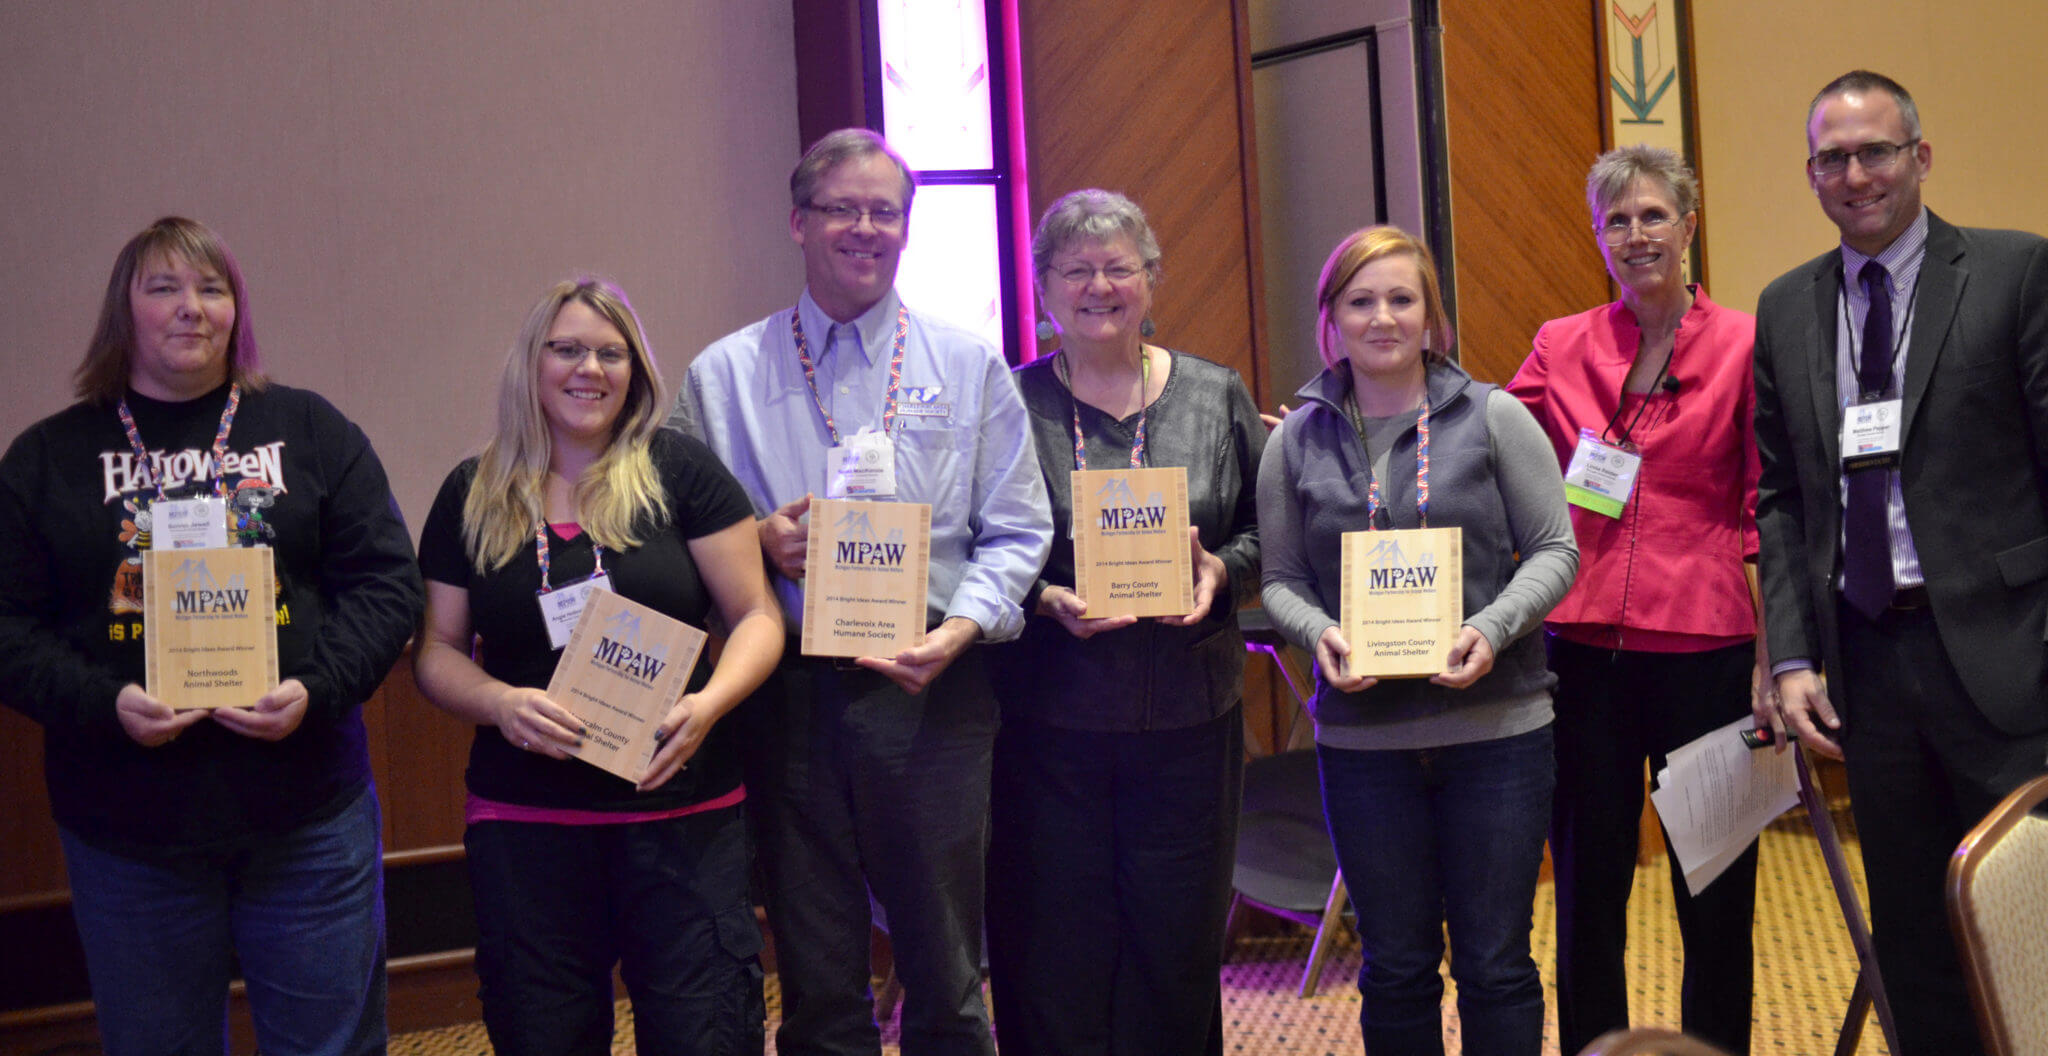 Some Michigan animal welfare groups were awarded "Bright Idea Awards" for their great programs and facility improvements, community outreach and ordinances. They shared these great and innovative ideas in an afternoon session.